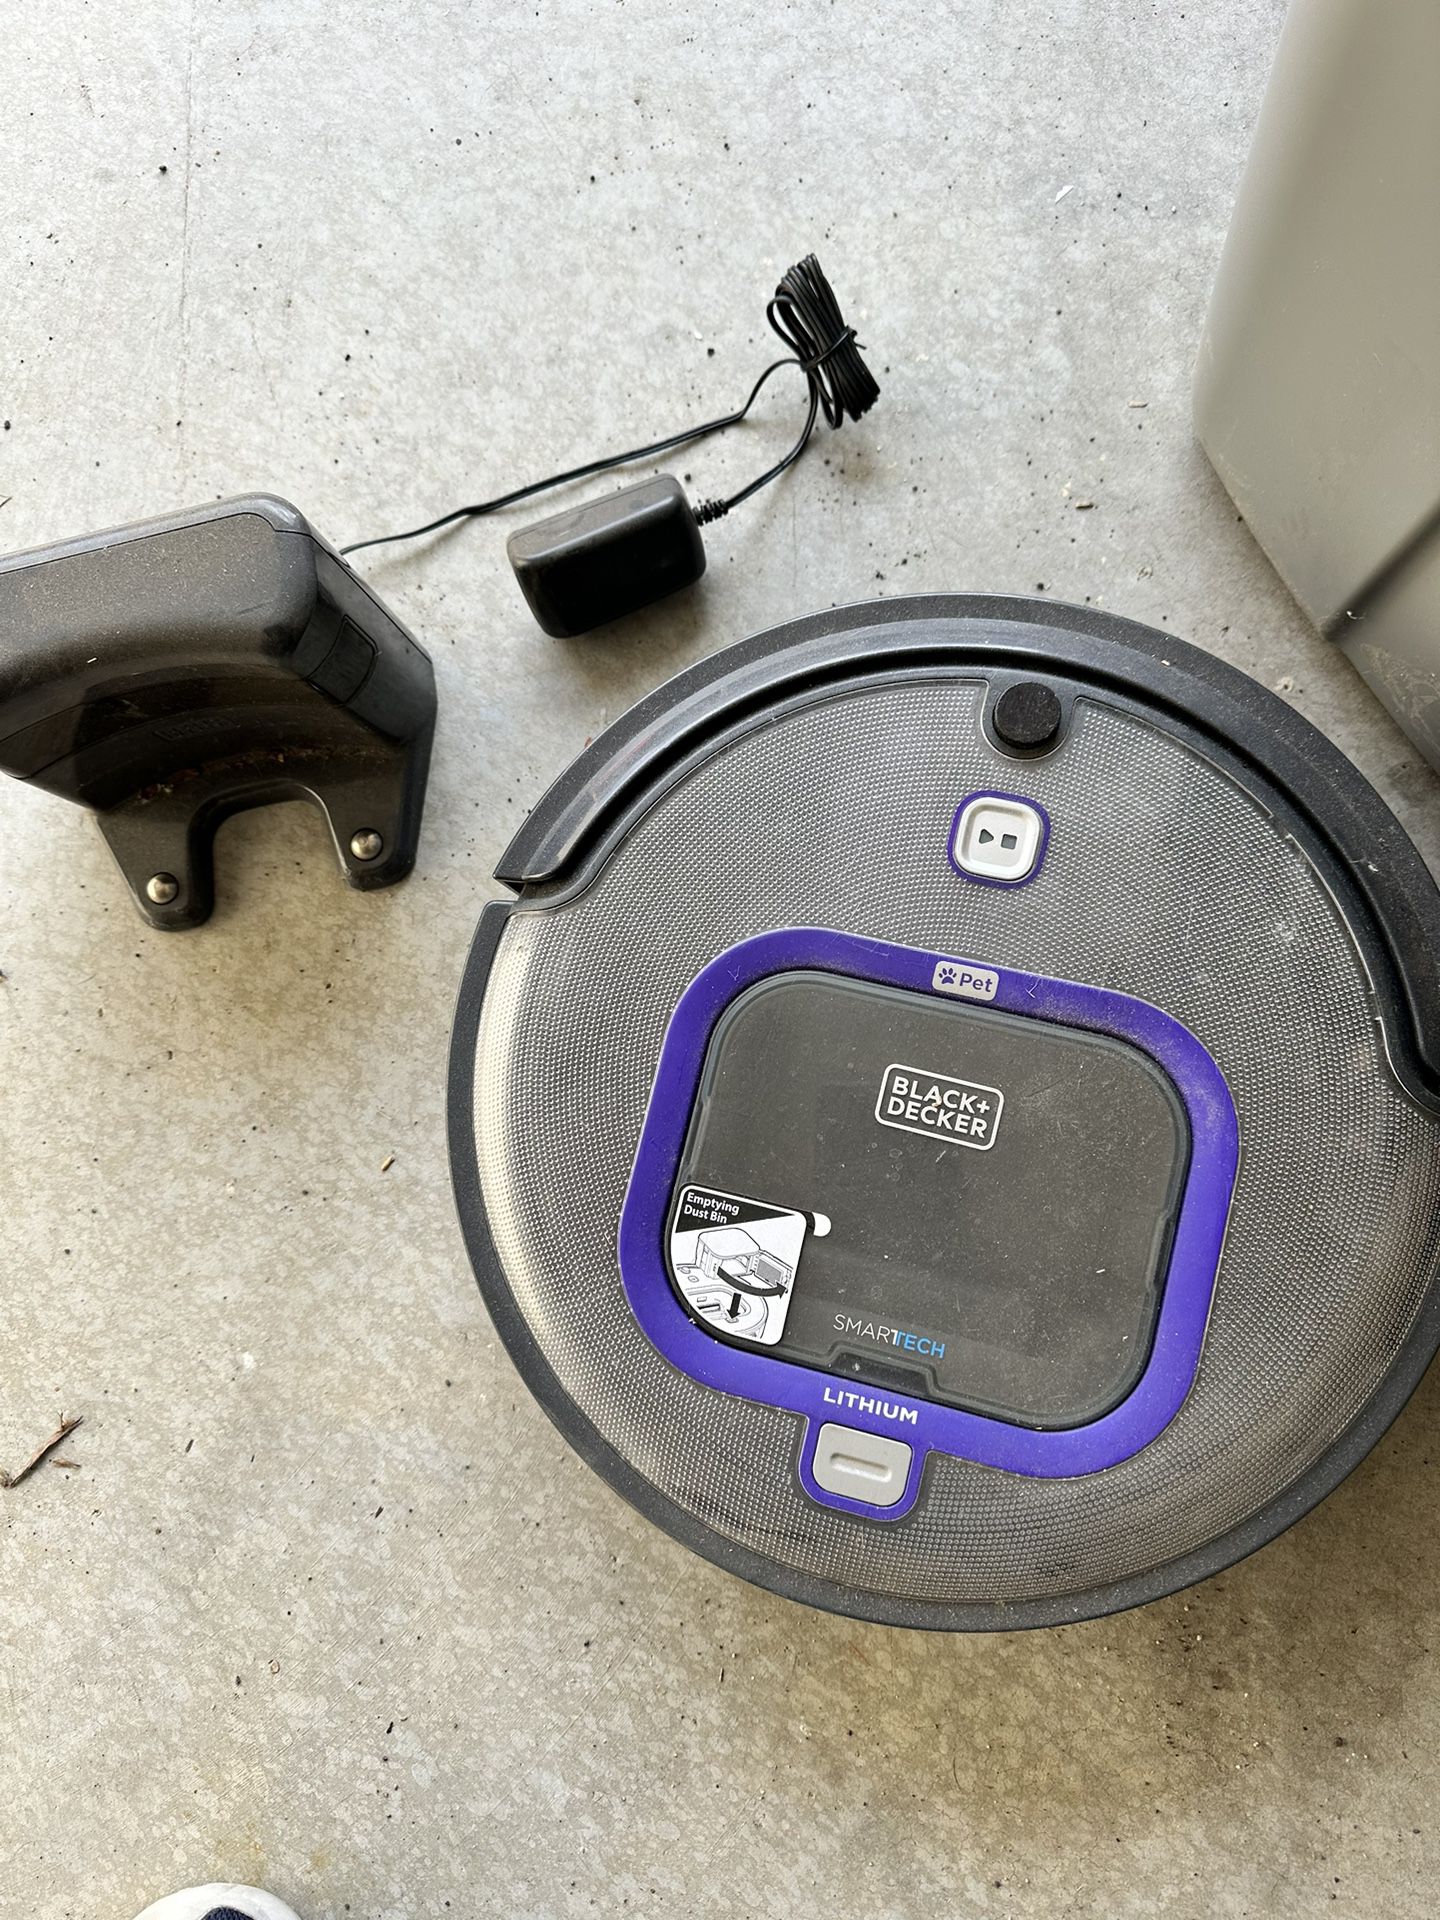 Black and decker + pet care automatic vacuum with charging dock.